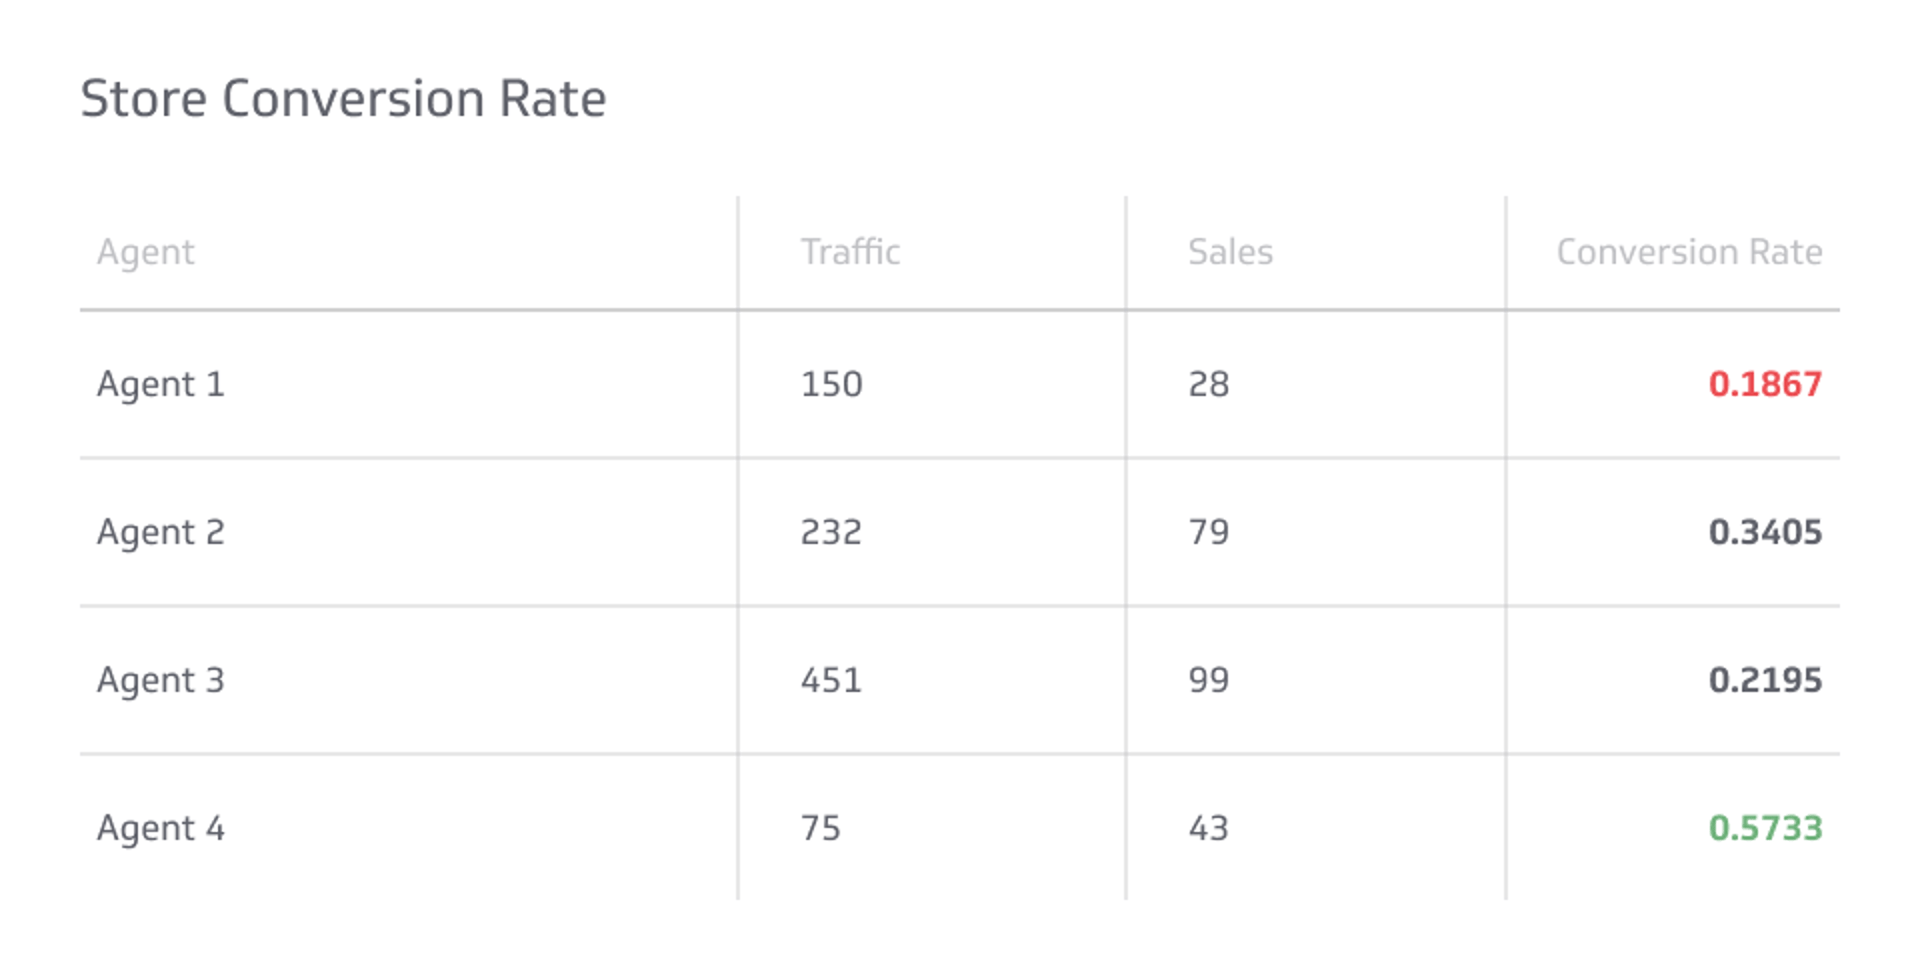 Sales KPI Example - Store Conversion Rate Metric